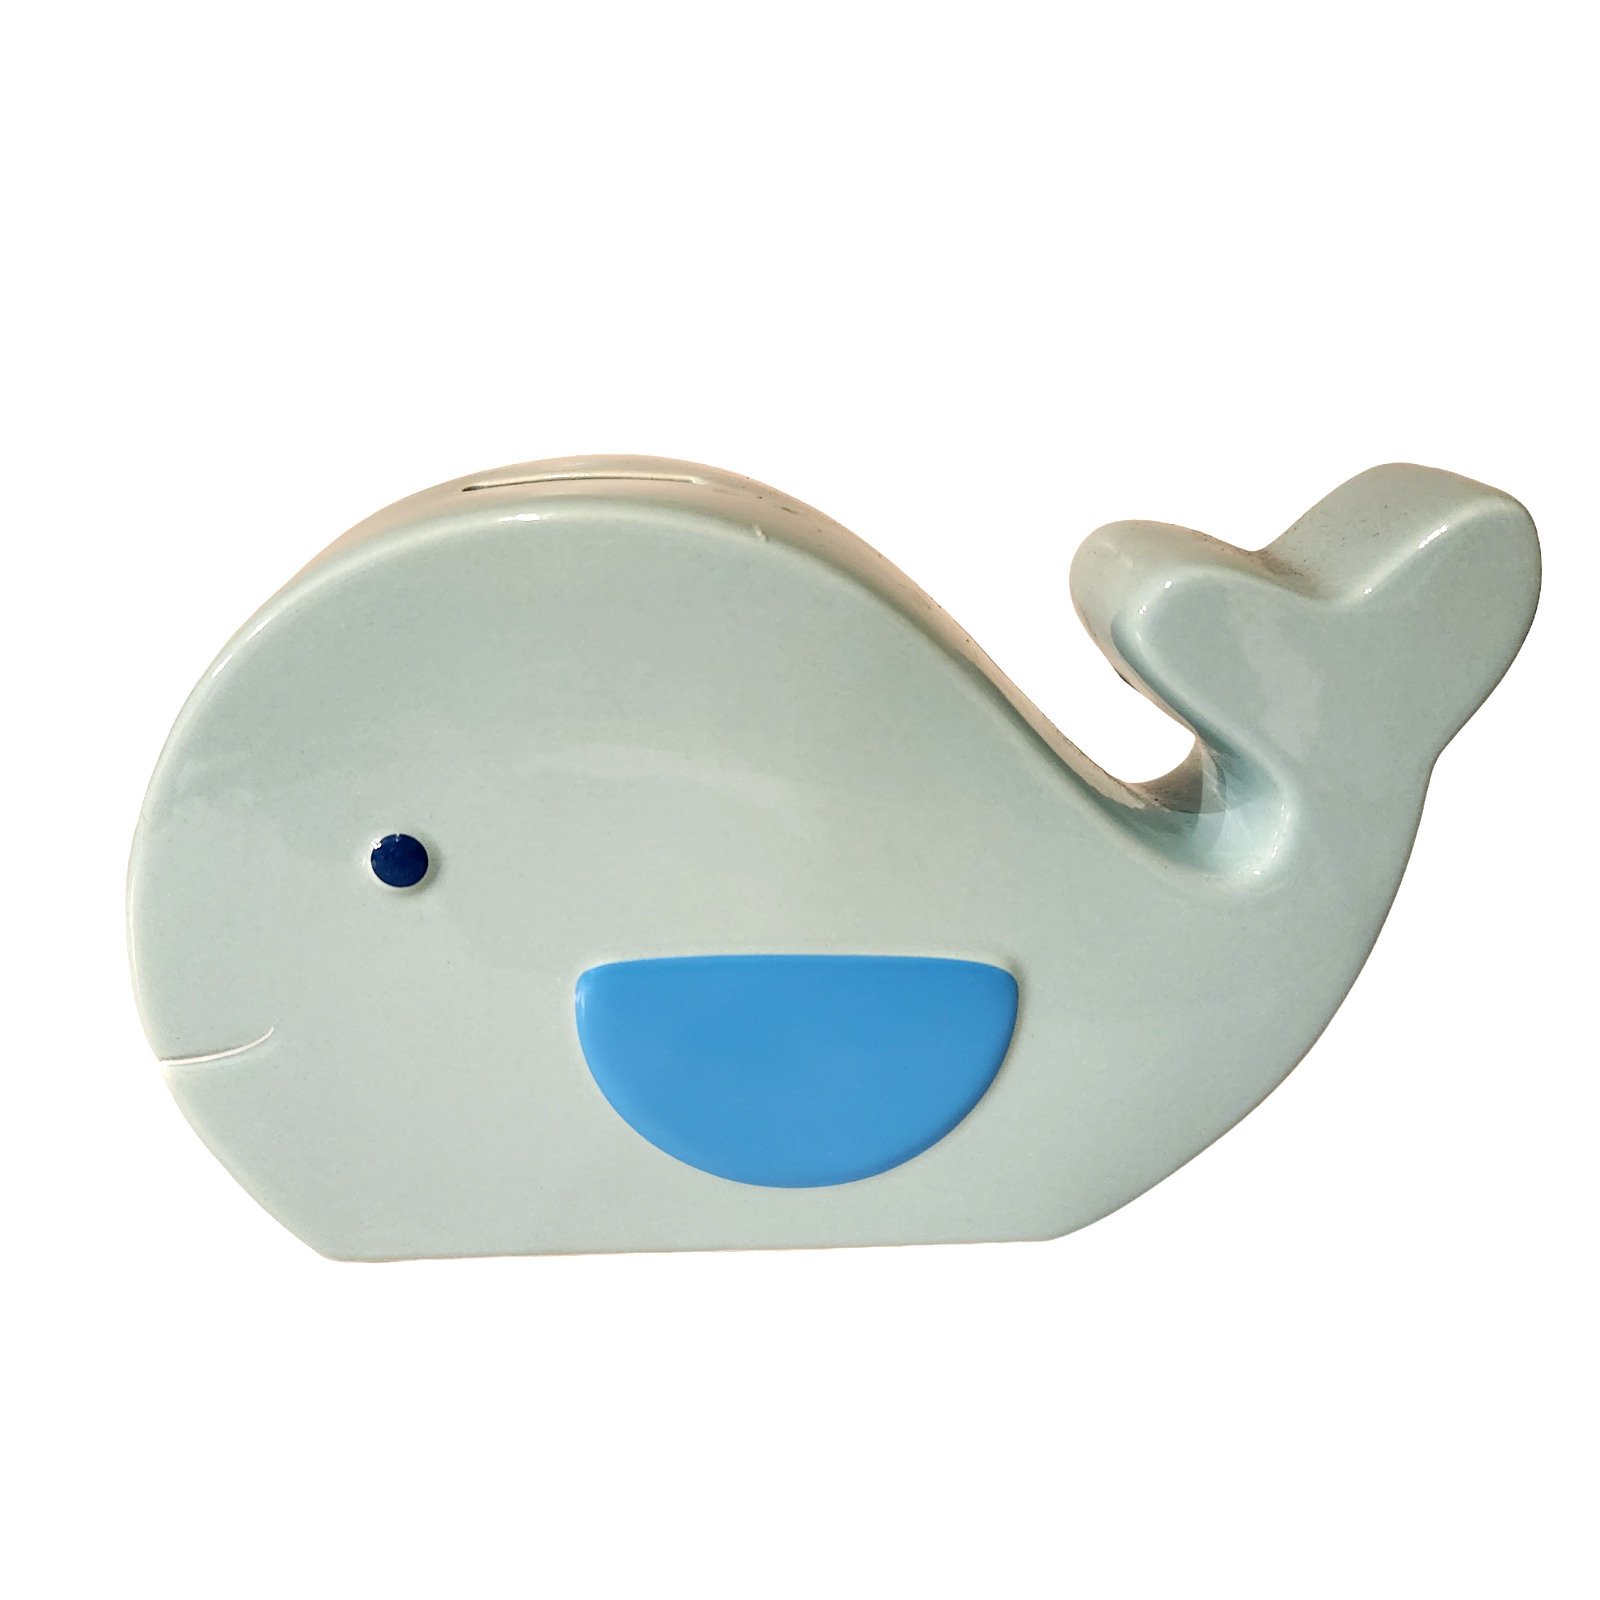 Pearhead Blue Whale Ceramic Piggy Bank With Original Stopper